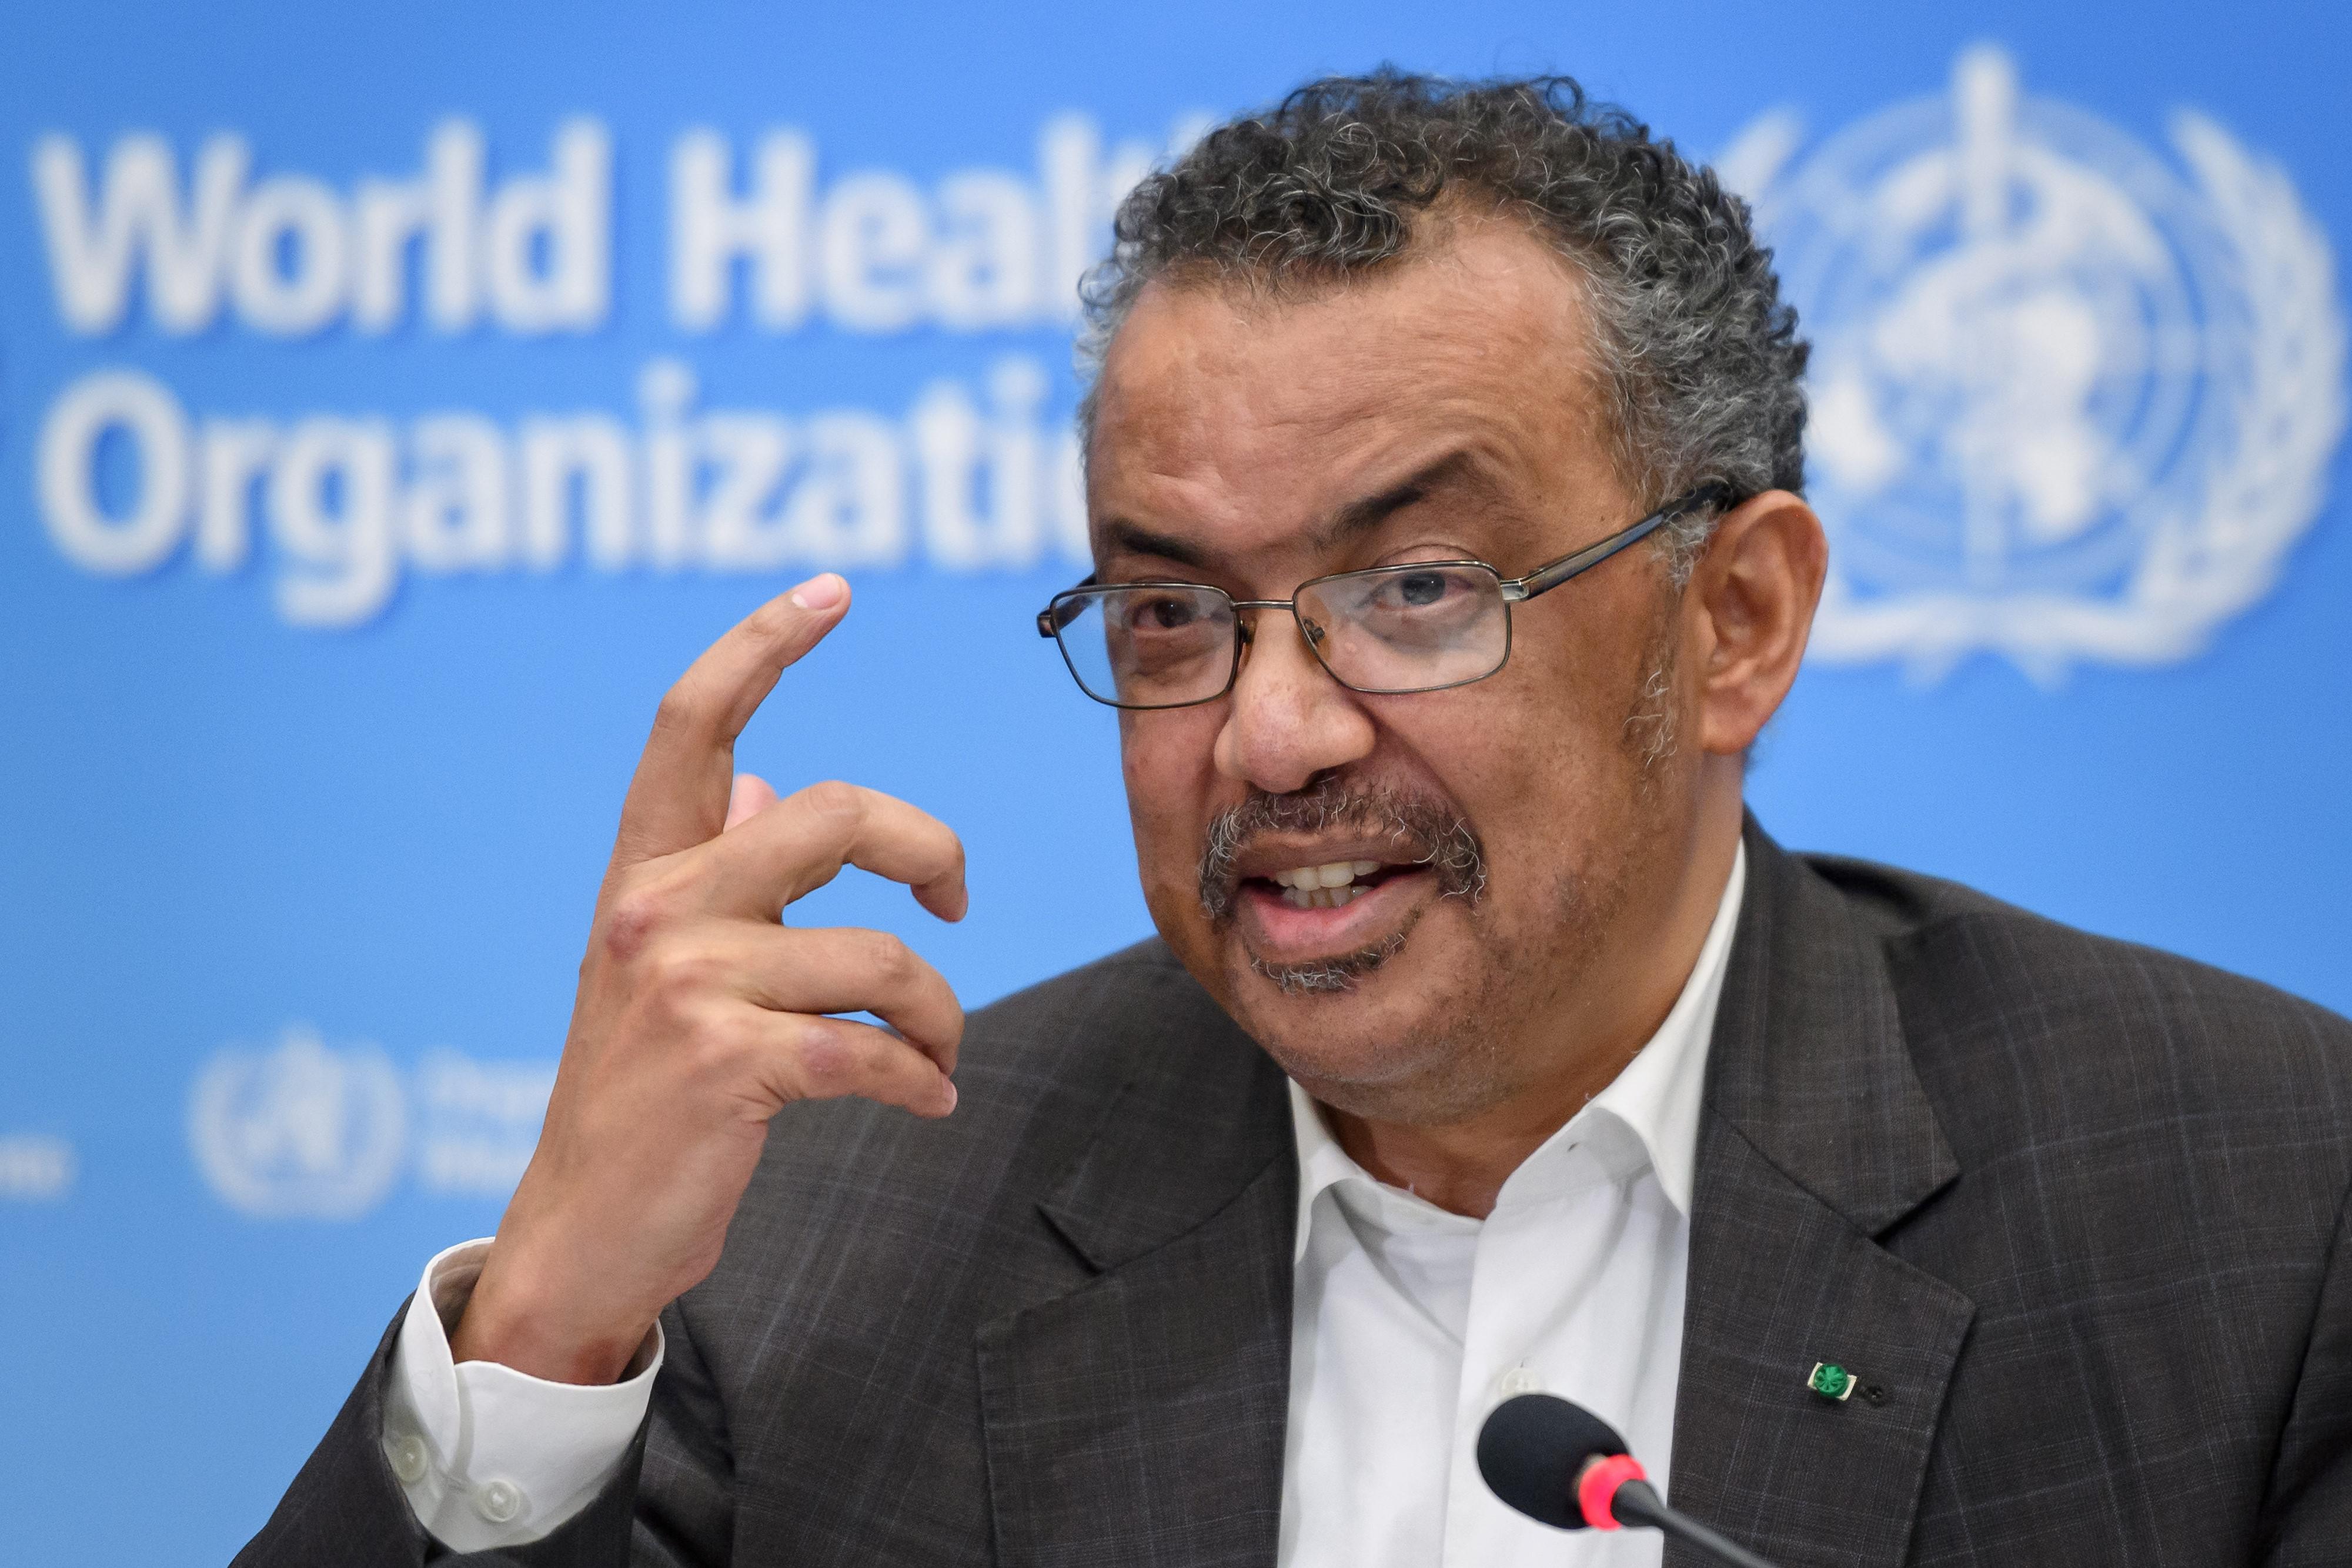 Tedros speaks at a mic at a World Health Organization press conference.